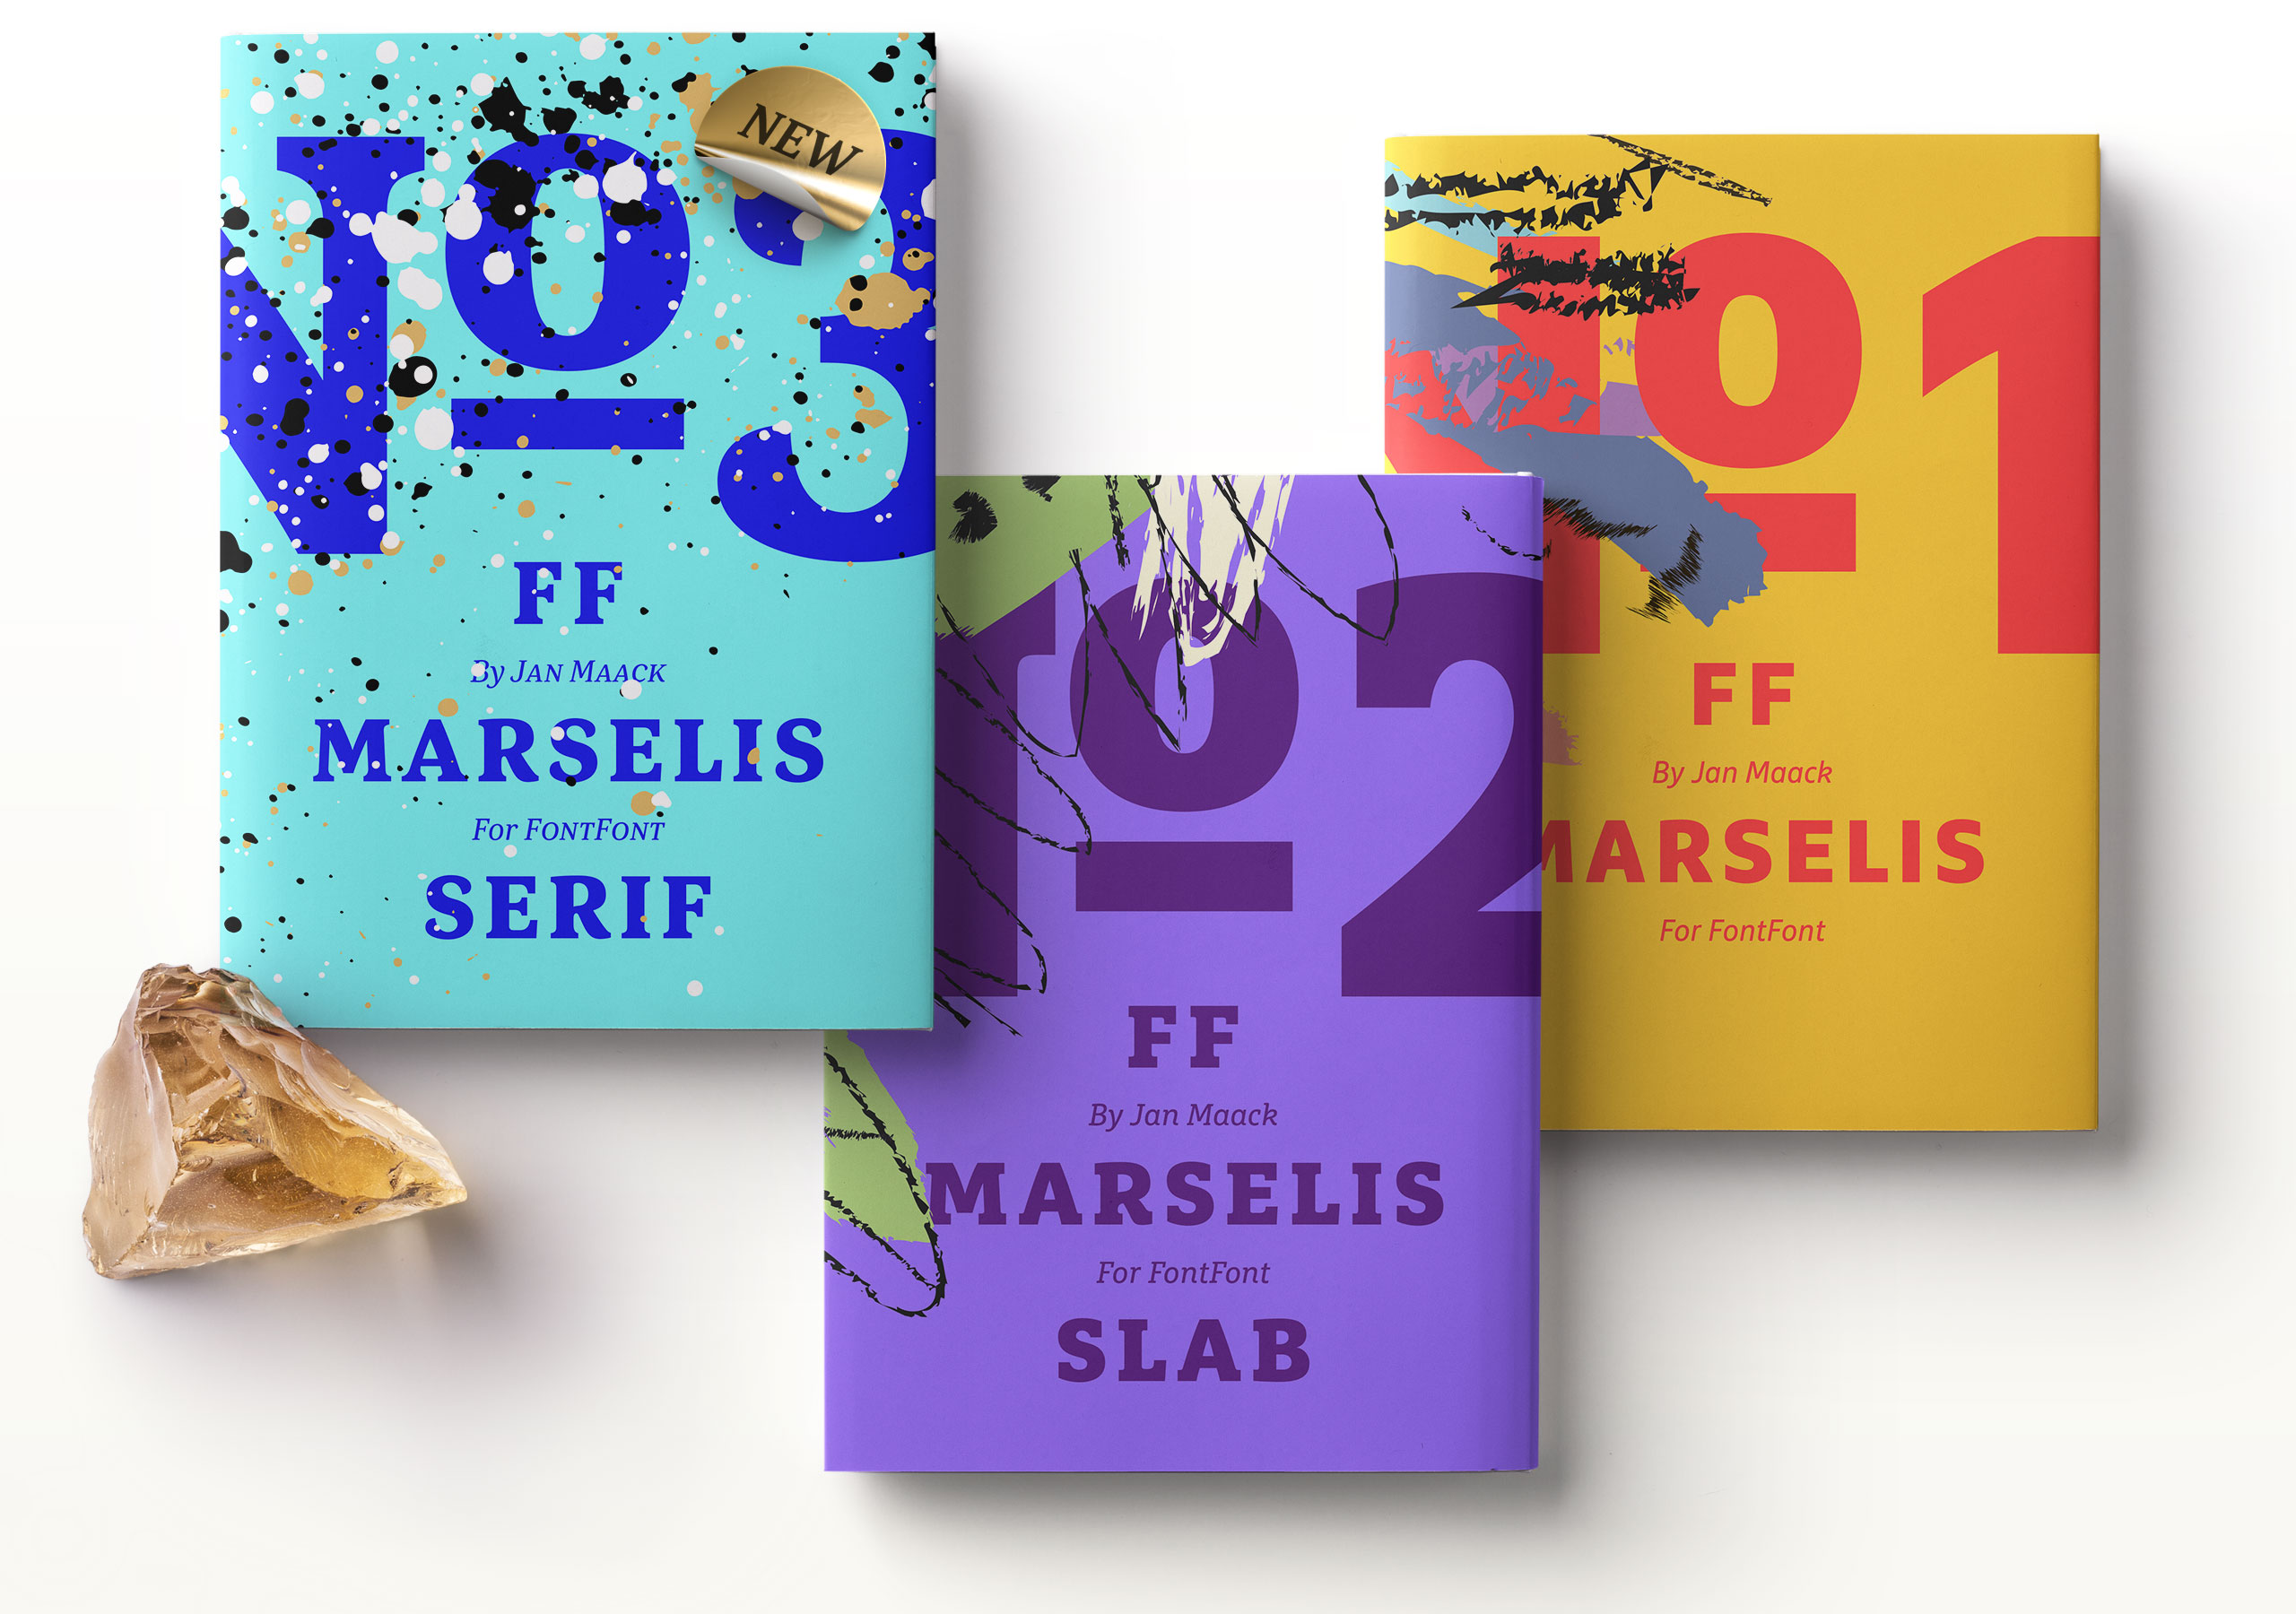 Fictional use case for FF Marselis Serif by Alexandra Schwarzwald